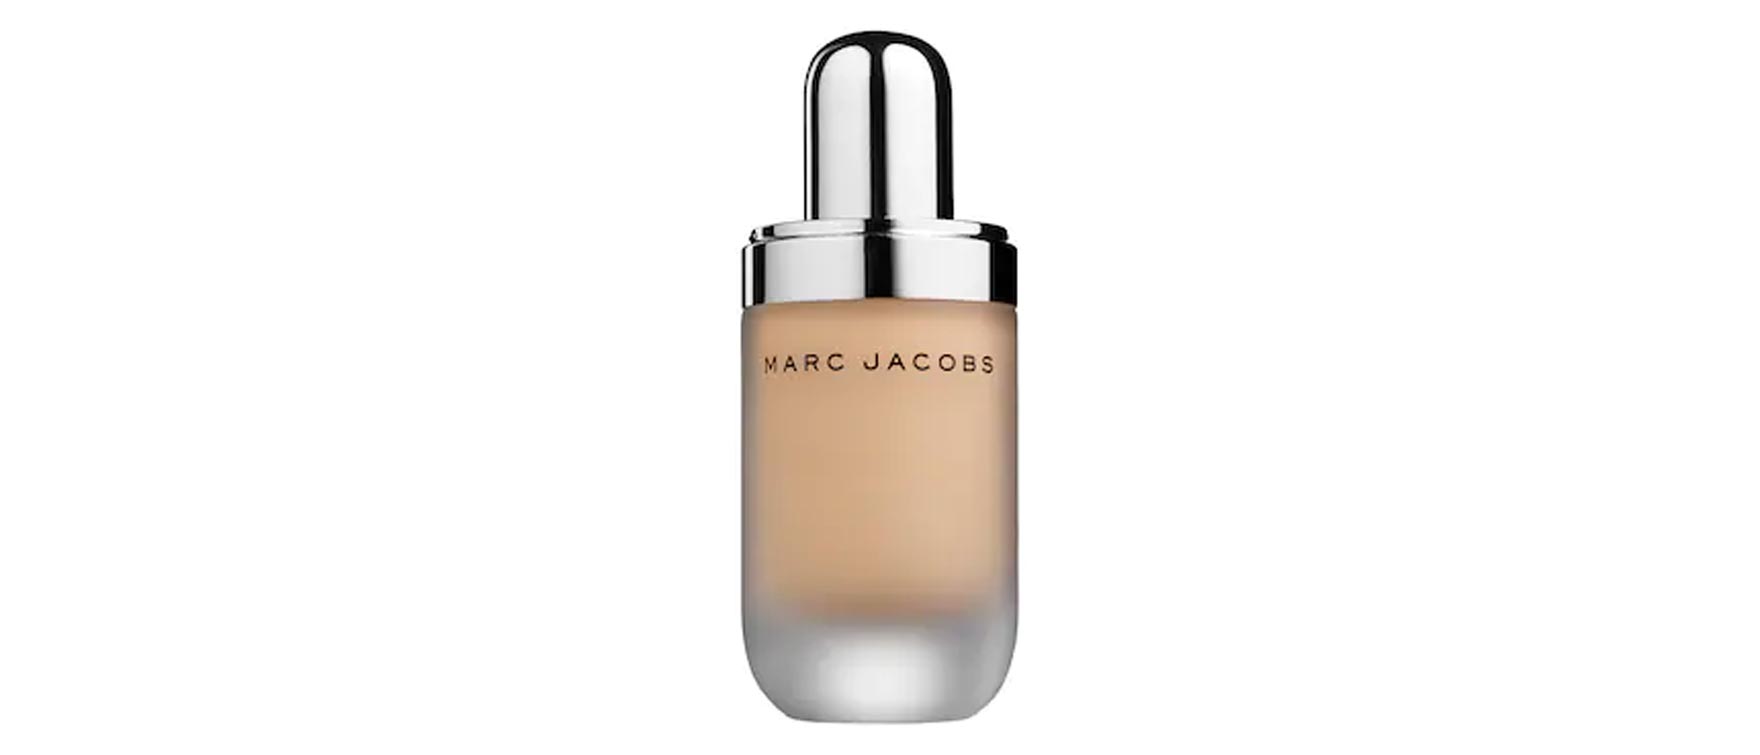 13. Re(marc) able Full Cover Foundation Concentrate Cocoa Medium 84